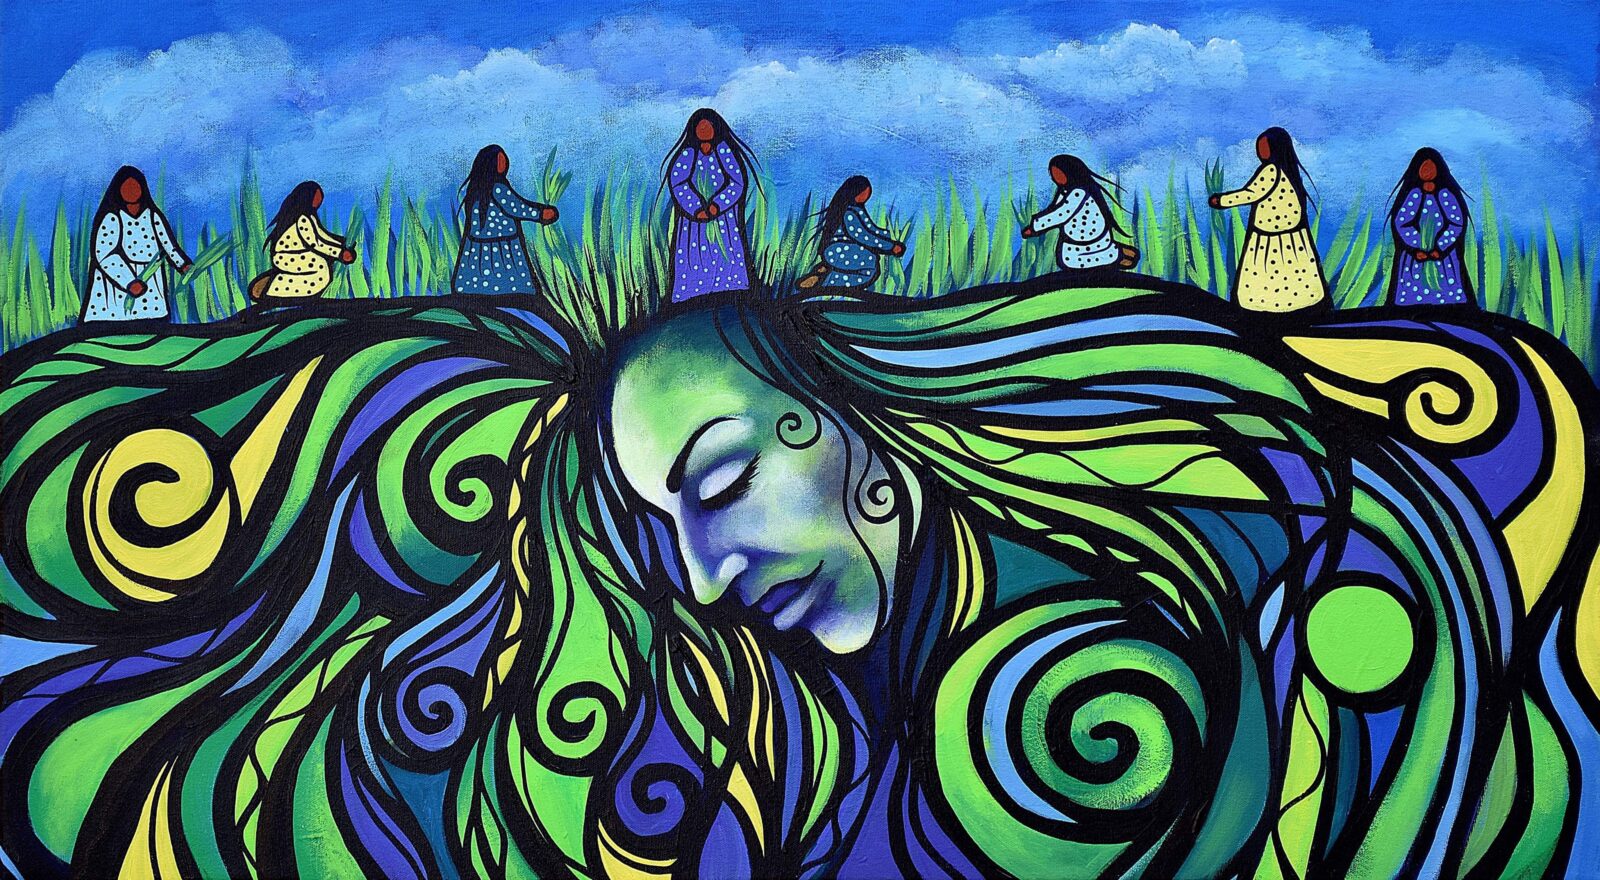 Jackie Traverse - Harvesting the Hair of Mother Earth